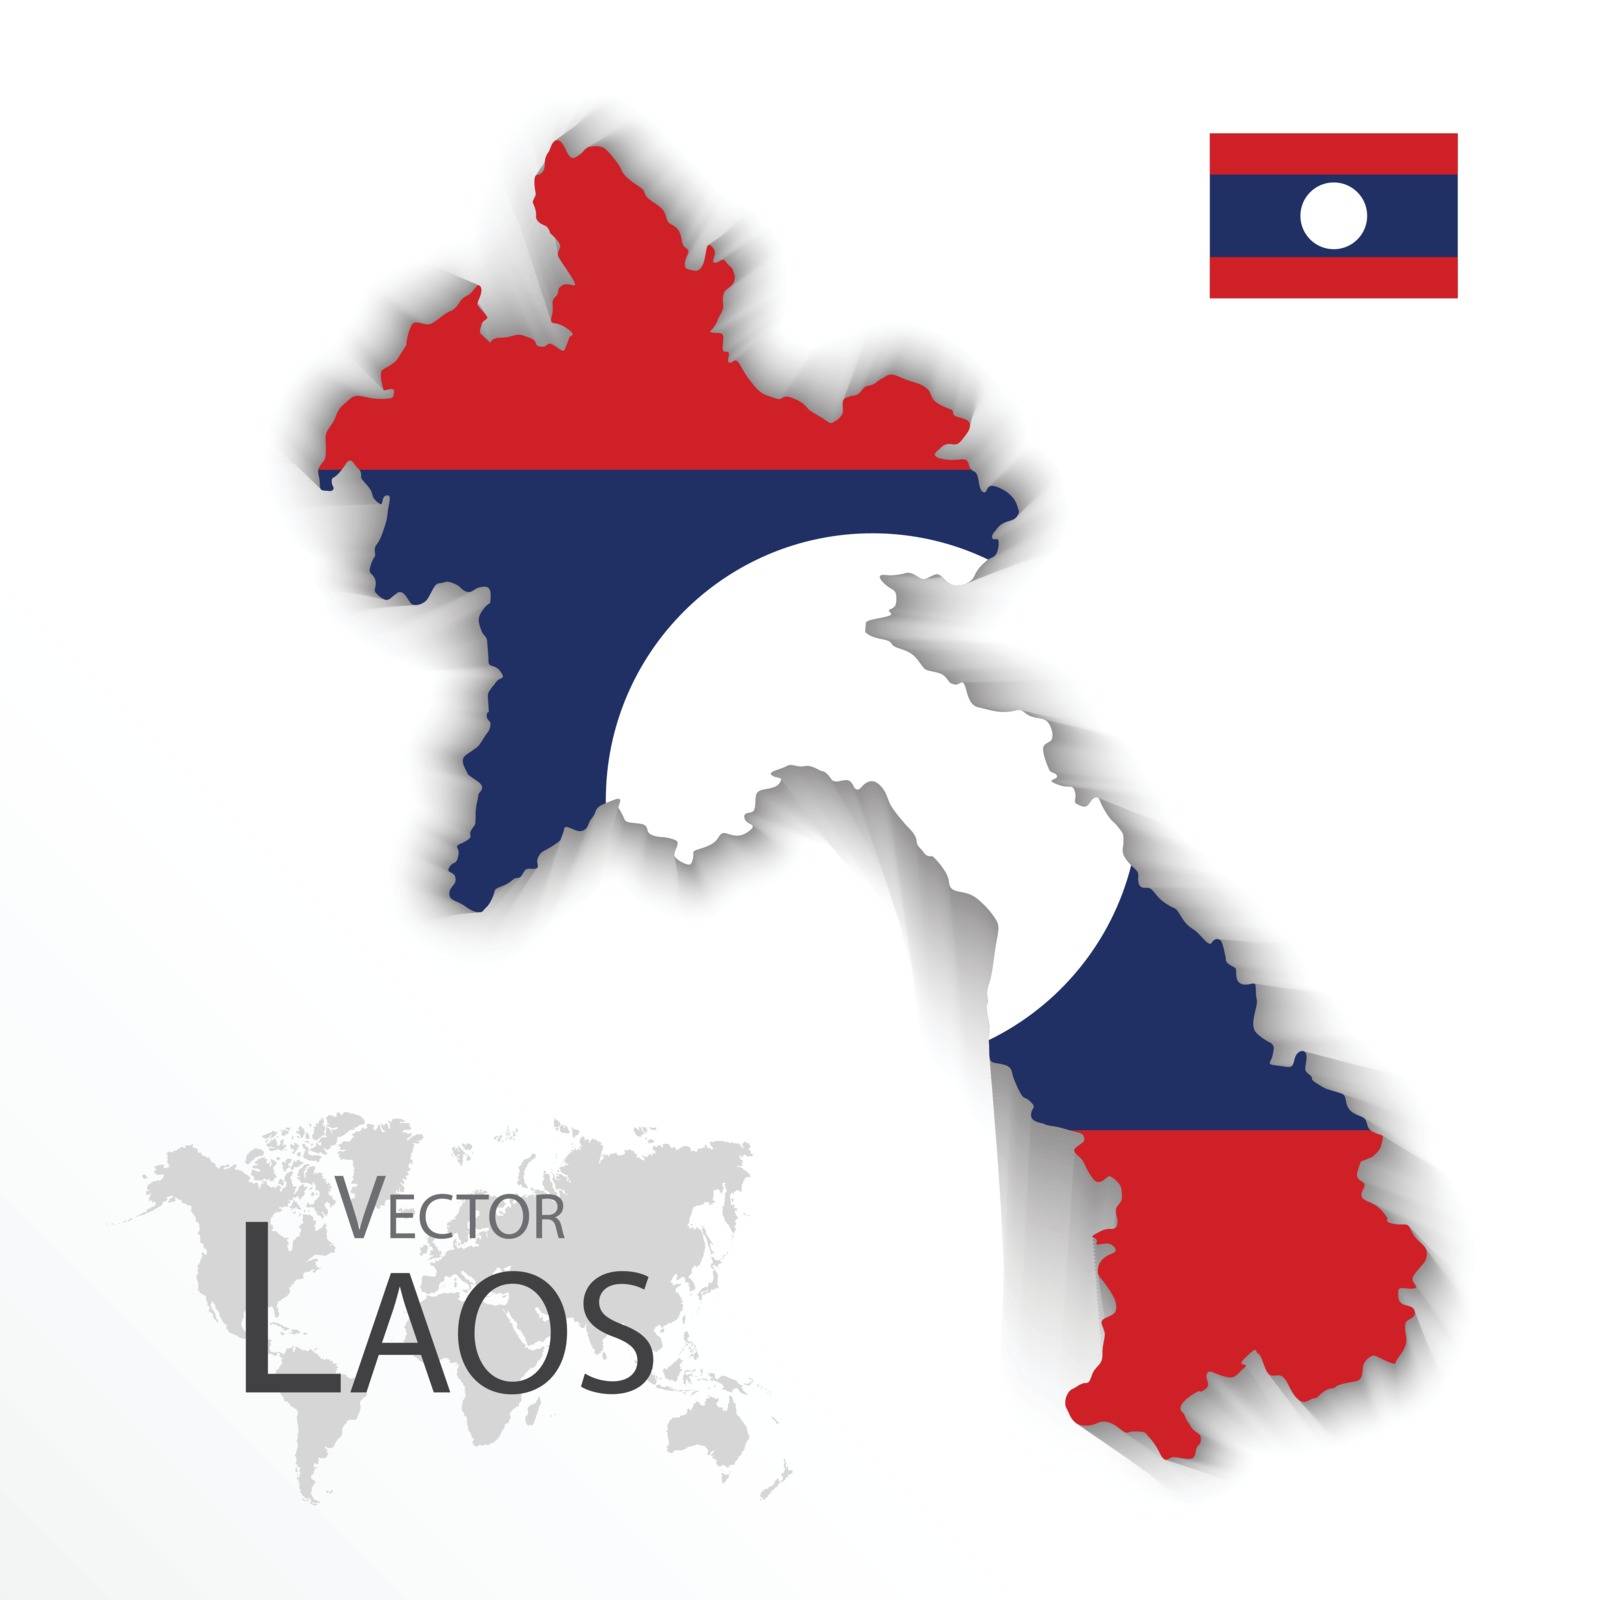 Laos ( People 's Democratic Republic of Laos ) ( map and flag ) ( transportation and tourism concept ) , laos is one of AEC ( ASEAN Economic Community )